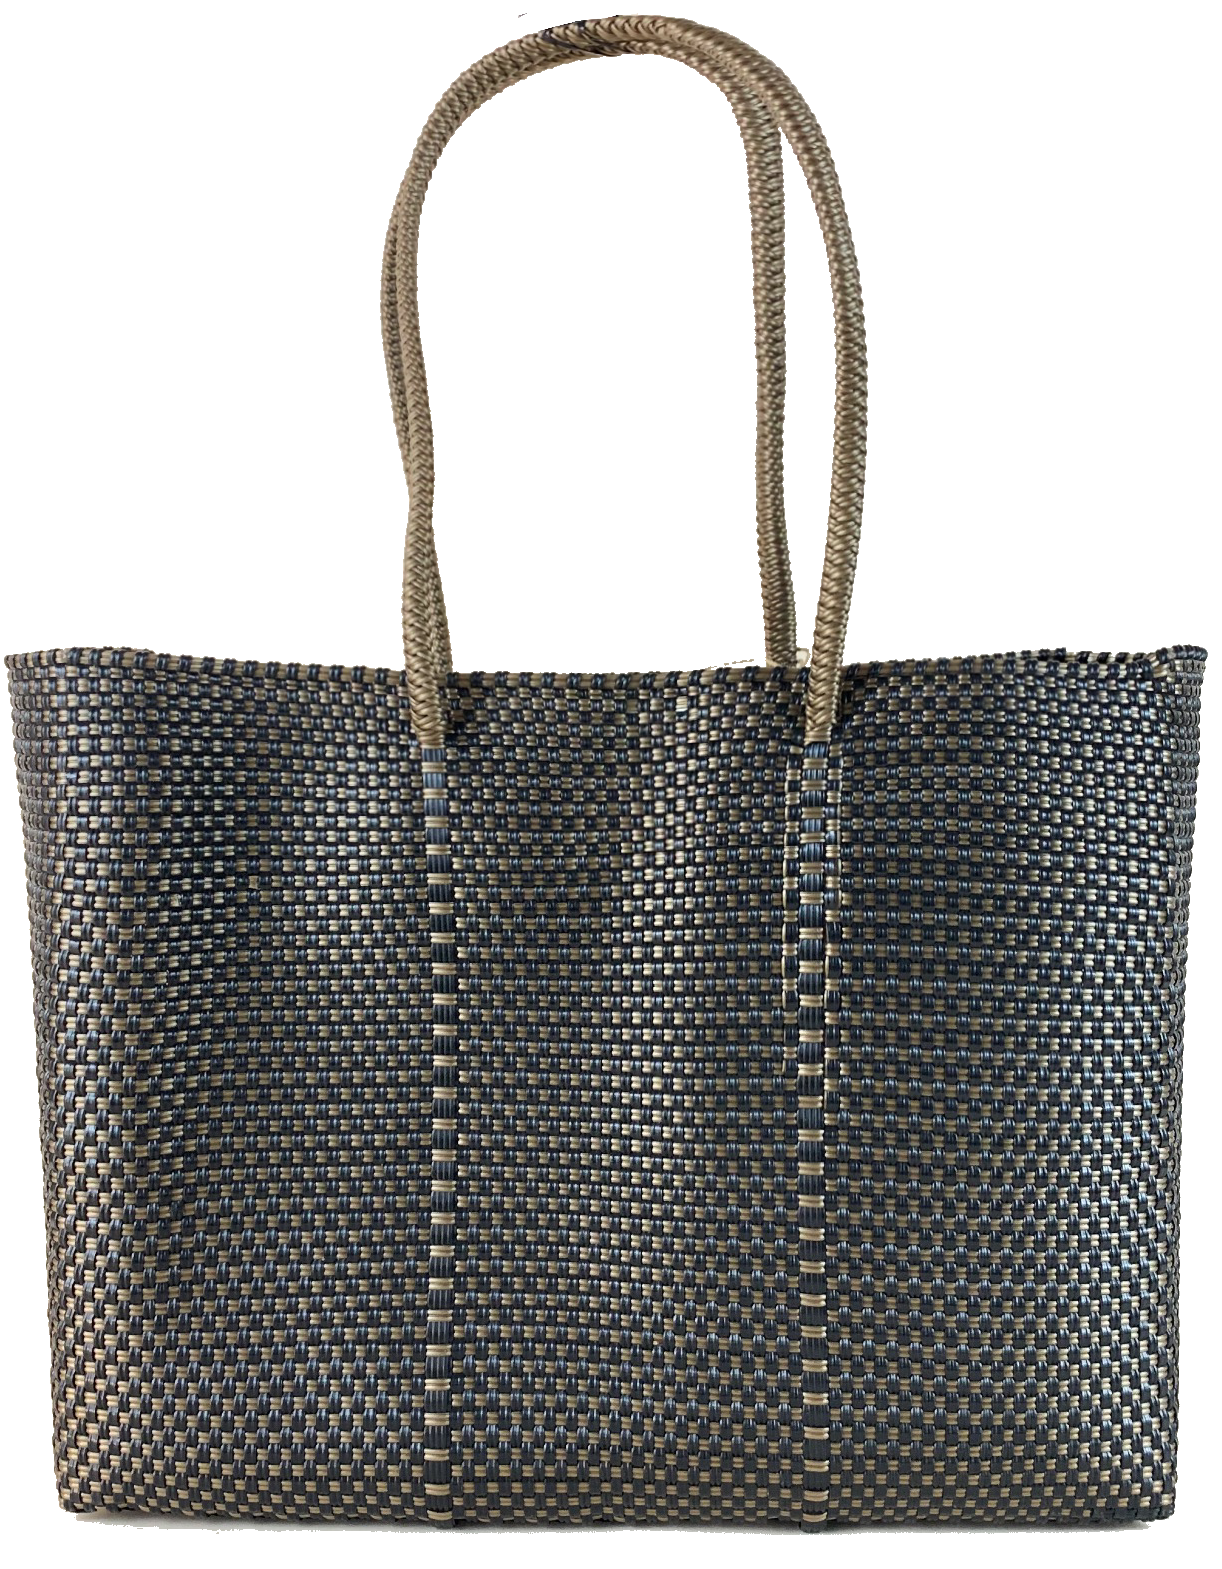 Tote - Black and Gold